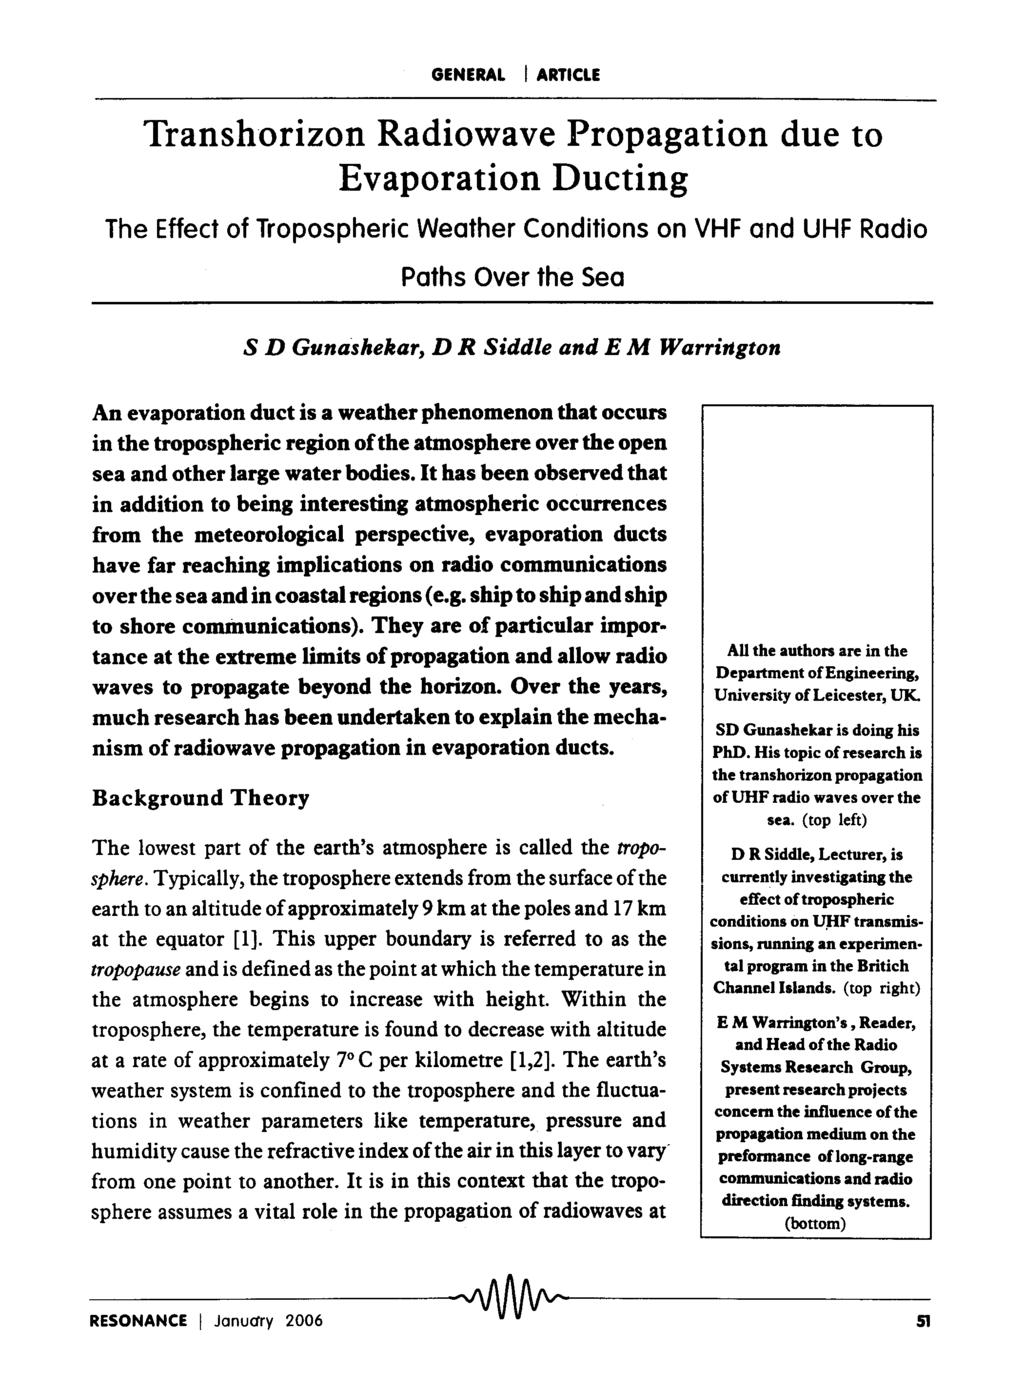 I ARTICLE Transhorizon Radiowave Propagation due to Evaporation Ducting The Effect of Tropospheric Weather Conditions on VHF and UHF Radio Paths Over the Sea S D Gunashekar, D R Siddle and E M